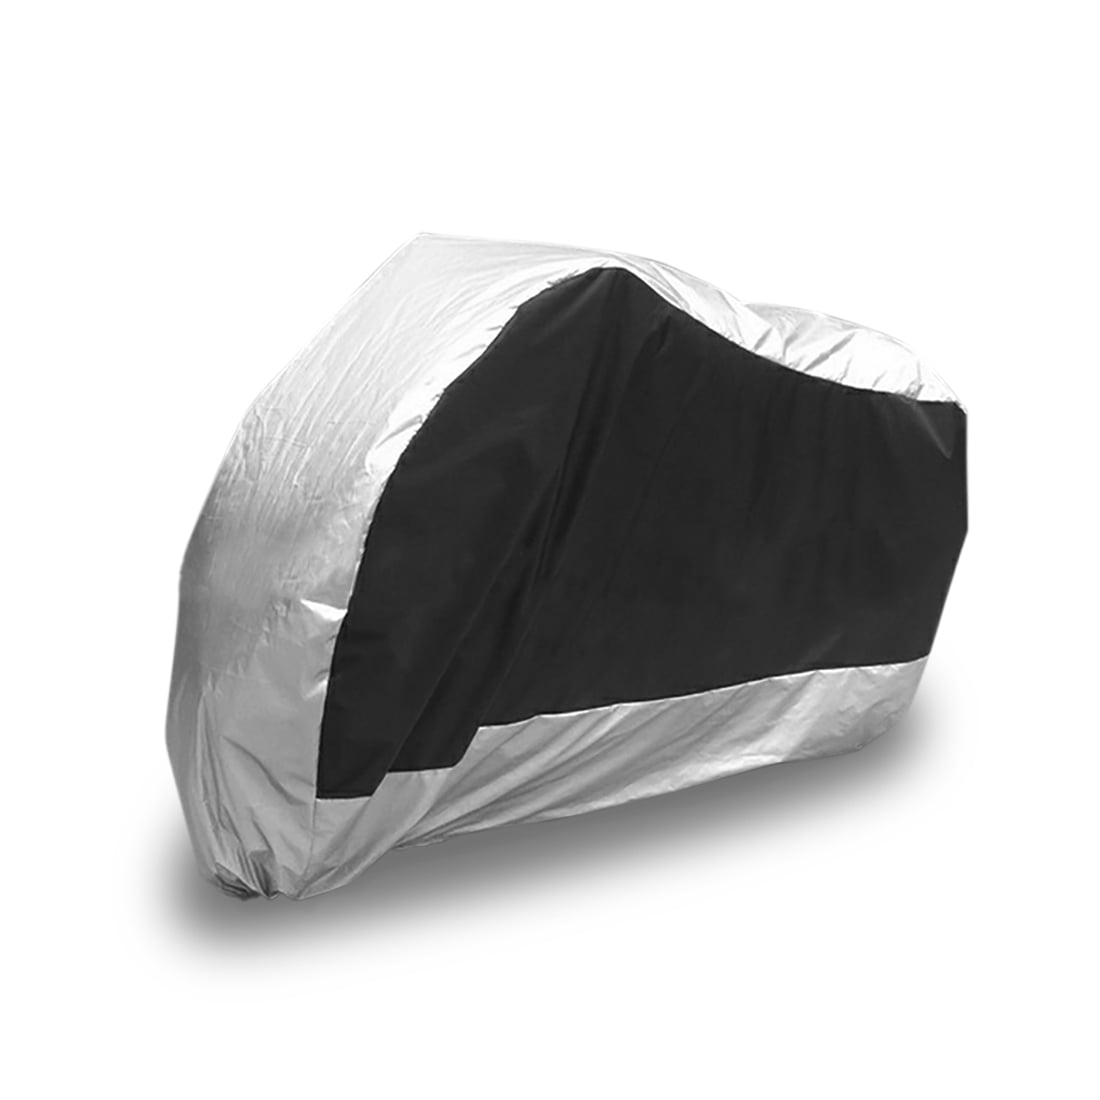 XXXL Waterproof Sun Dust Cover BR For Harley Davidson Sportster Softail Touring